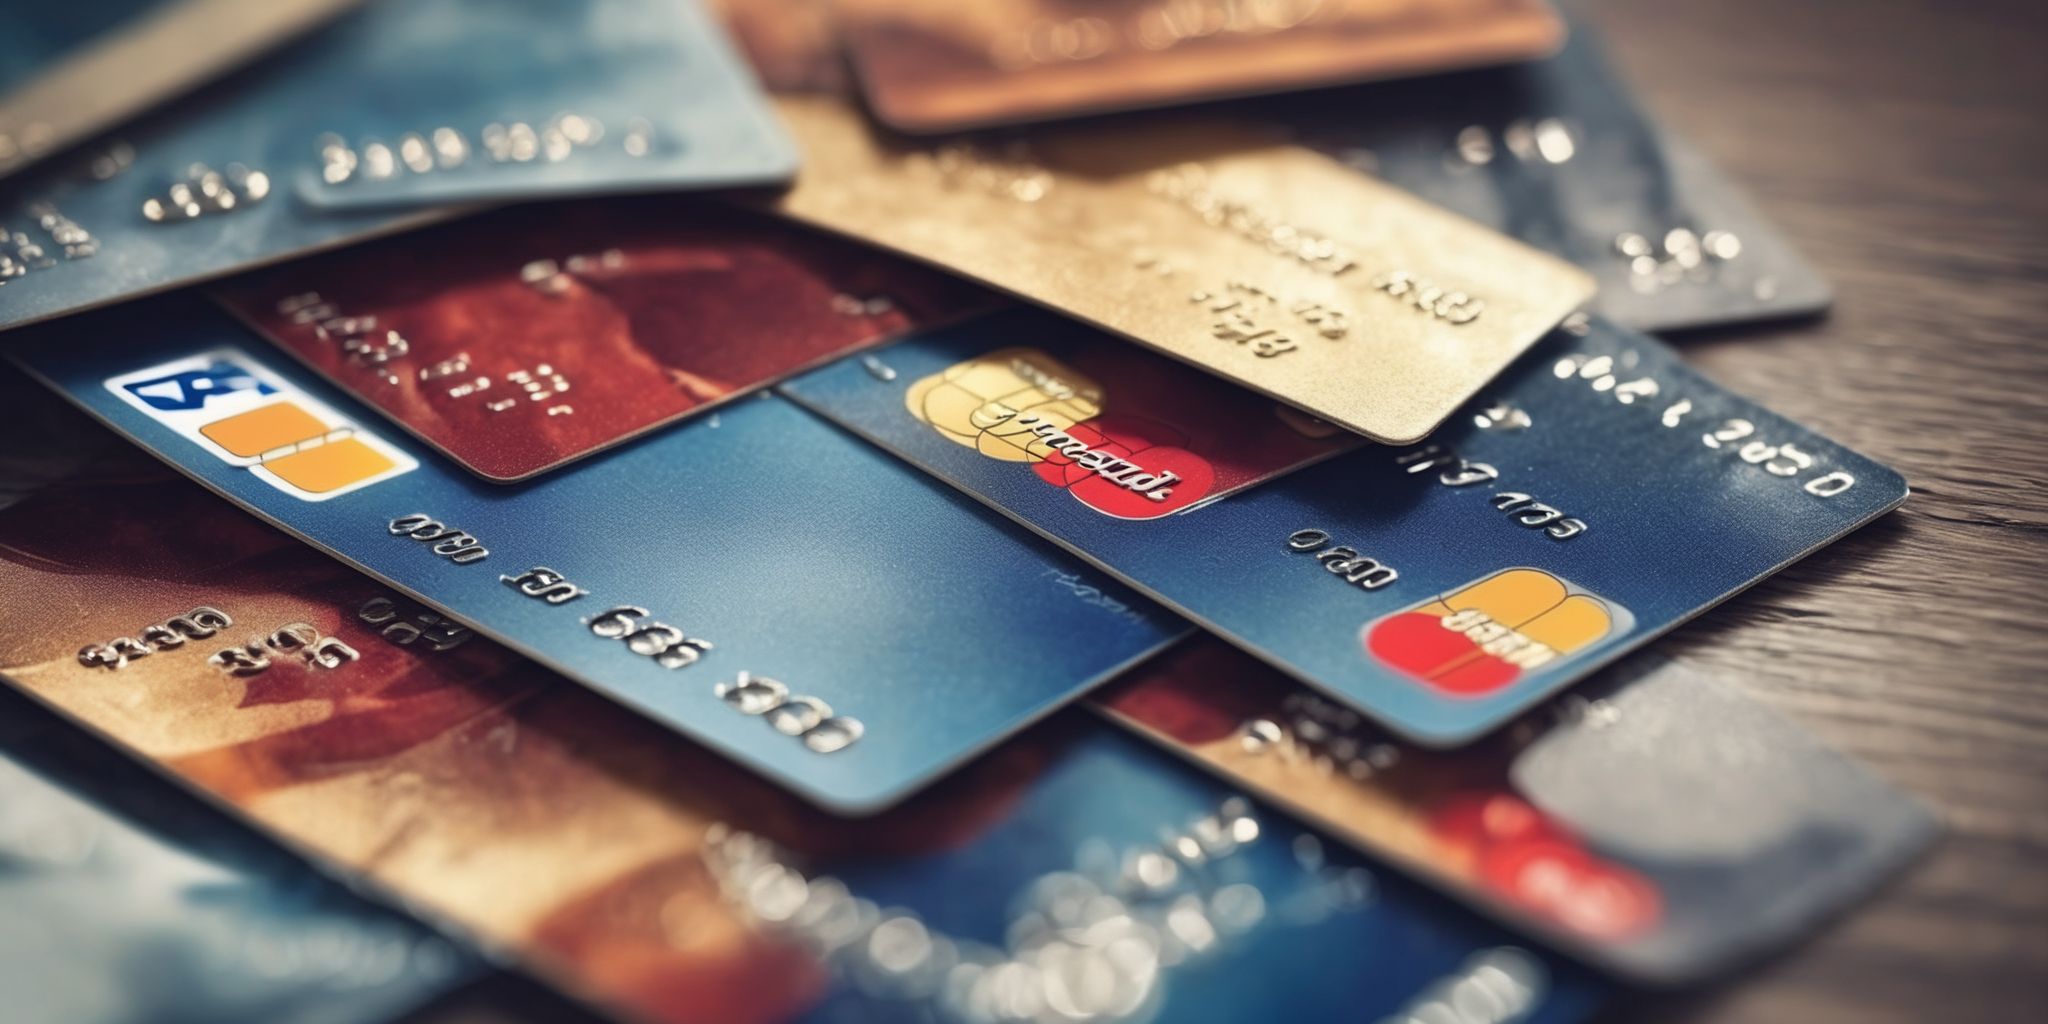 Credit cards  in realistic, photographic style